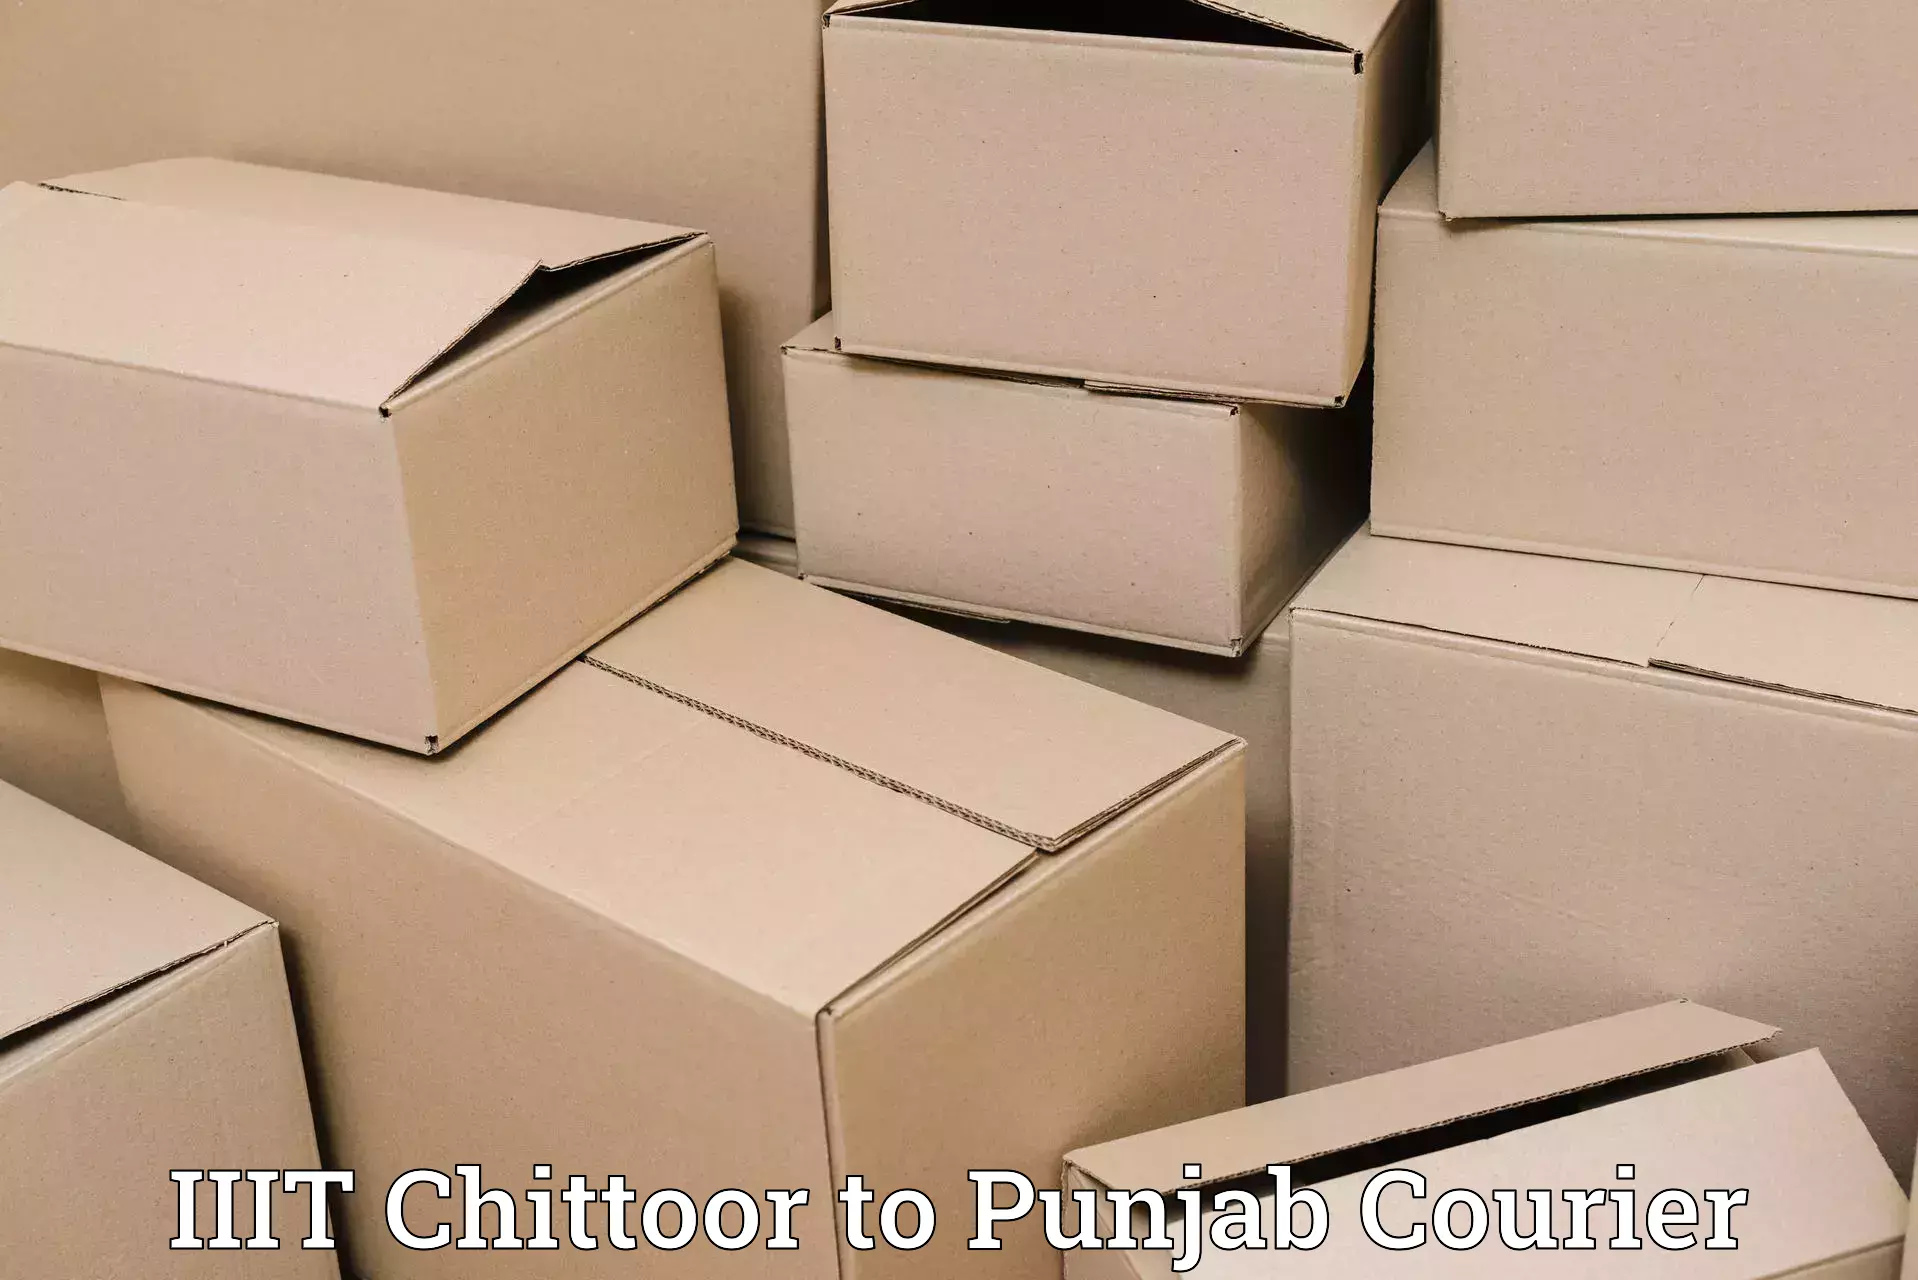 Efficient parcel tracking IIIT Chittoor to Pathankot